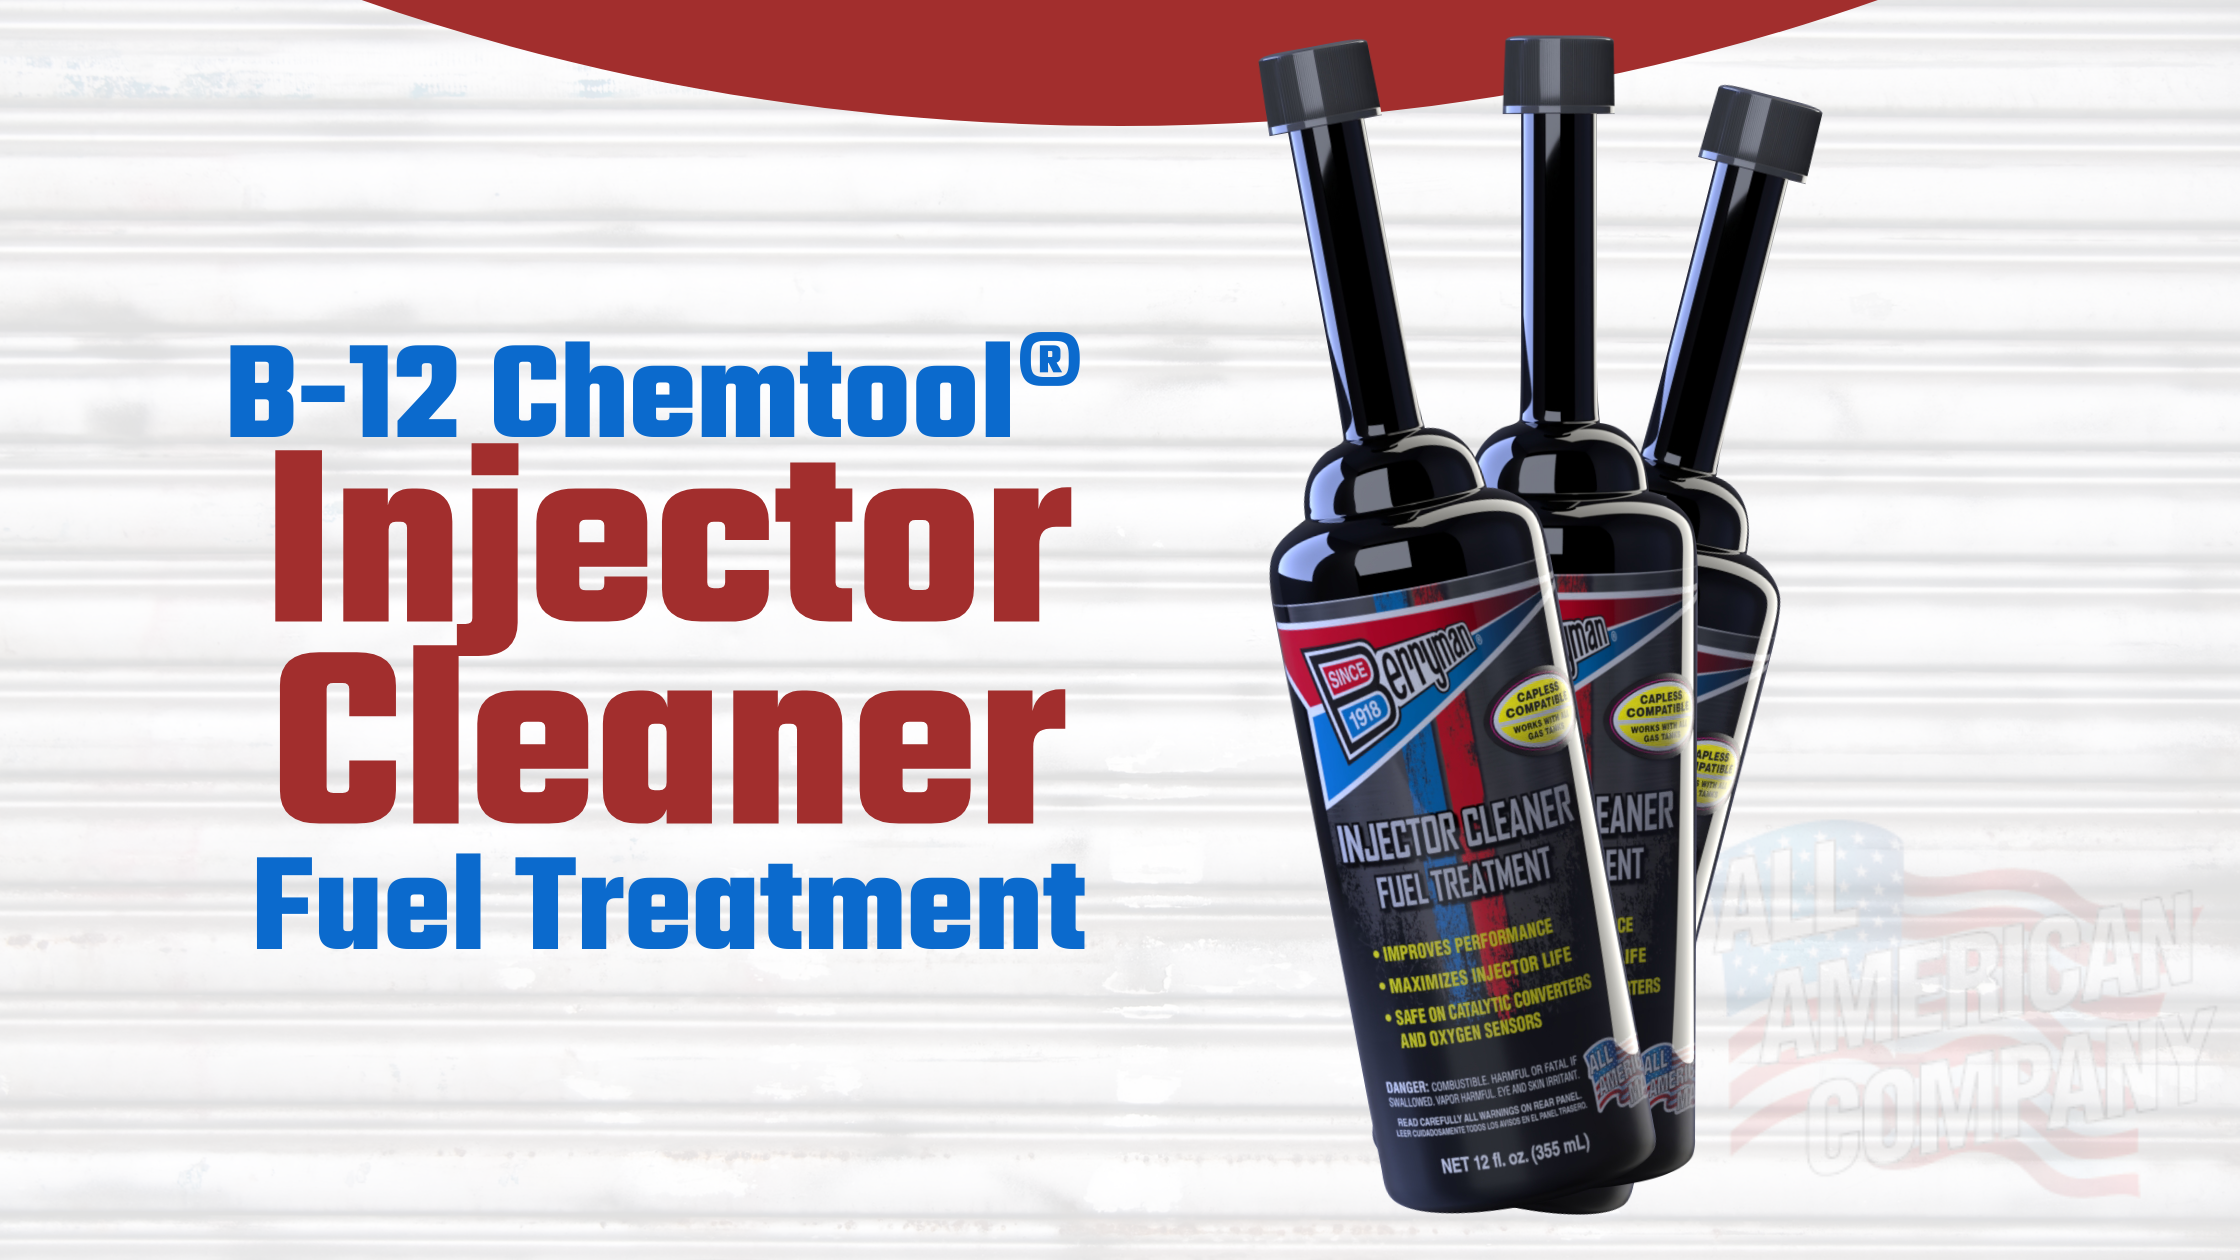 B 12 Chemtool® Injector Cleaner Fuel Treatment